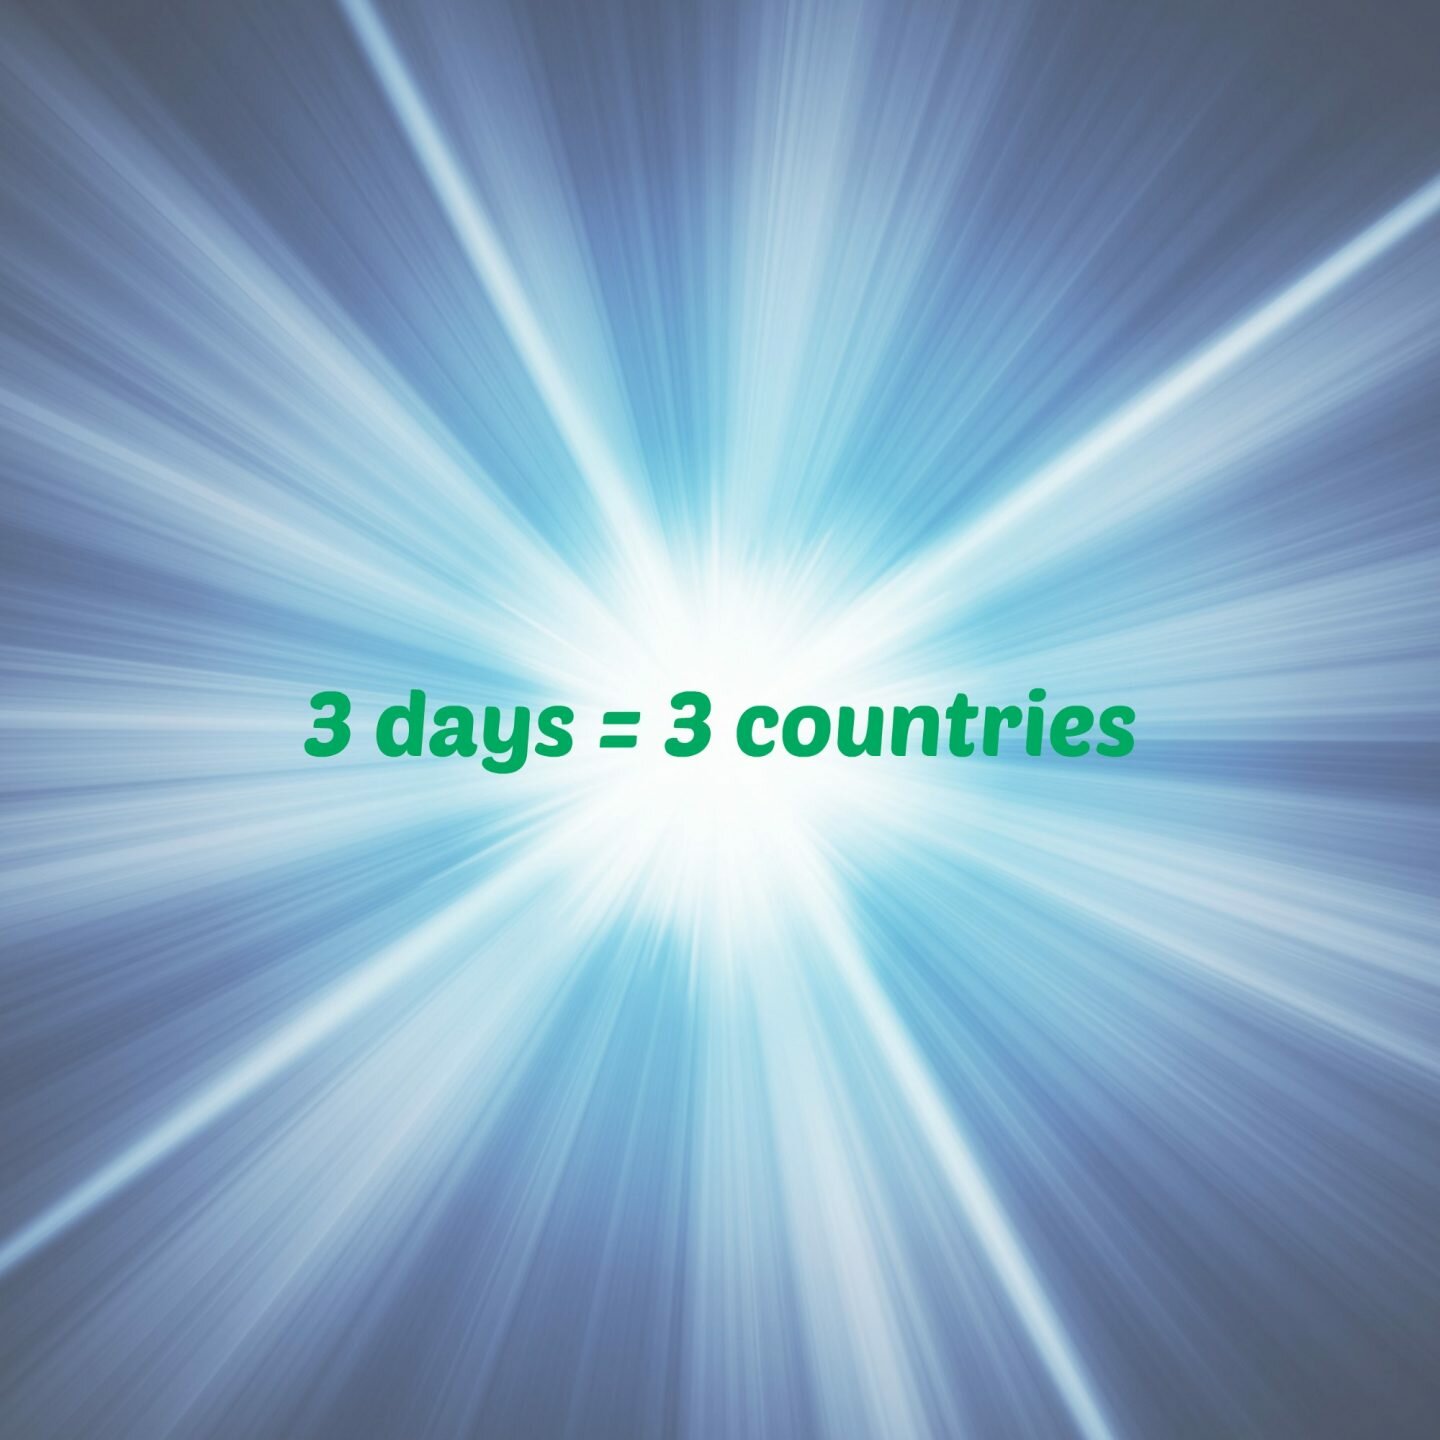 3 days = 3 countries